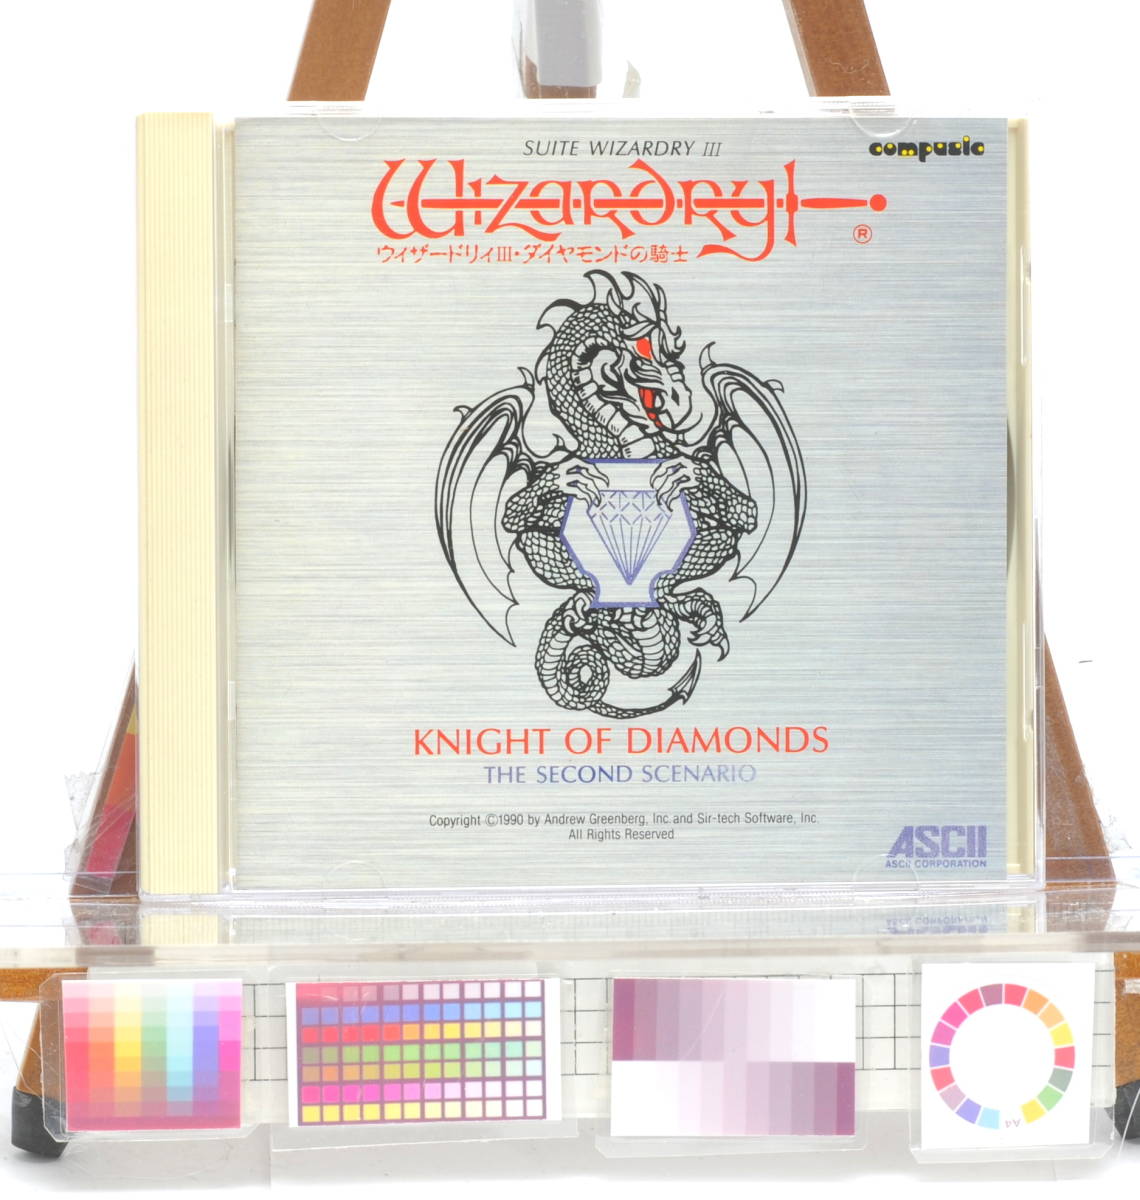 [Dutch Auction][Delivery Free]1980s- Game CD SUITE WIZARDRY Ⅲ Knight of Diamond ウイザードリィⅢ 組曲 ダイヤモンドの騎士 [tagCD]